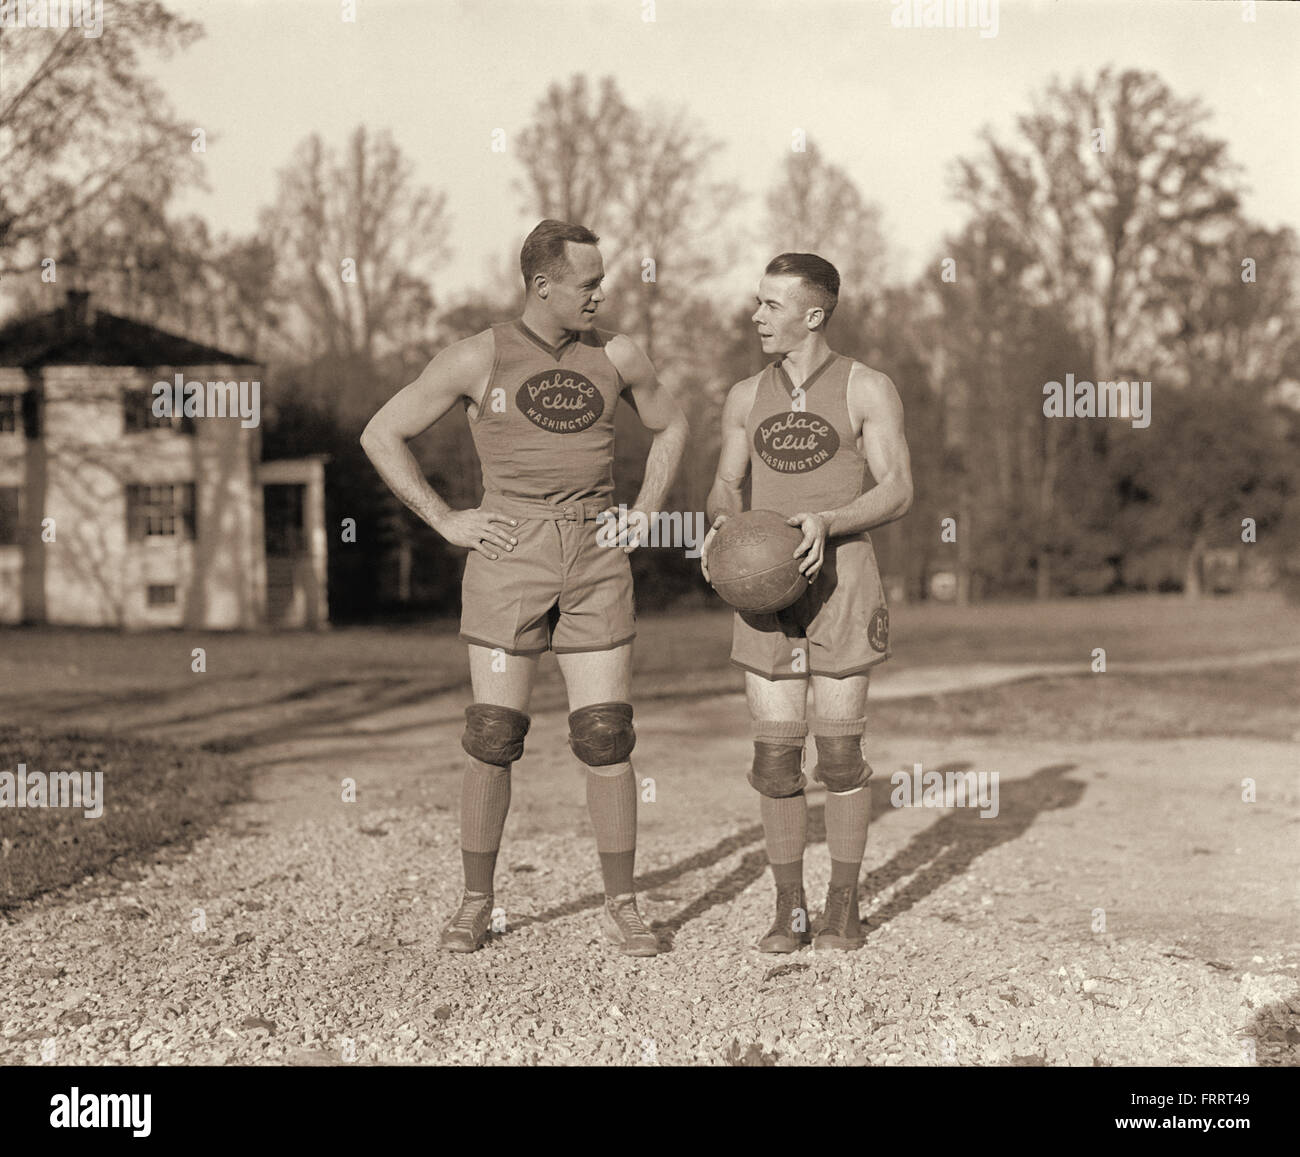 Bob Grody and manager Ray Kennedy of the Palace Club basketball team, a Washington, D.C., franchise of the American Professional Basketball League, which was sponsored by the Palace Laundry.  Photo: 1925. Stock Photo